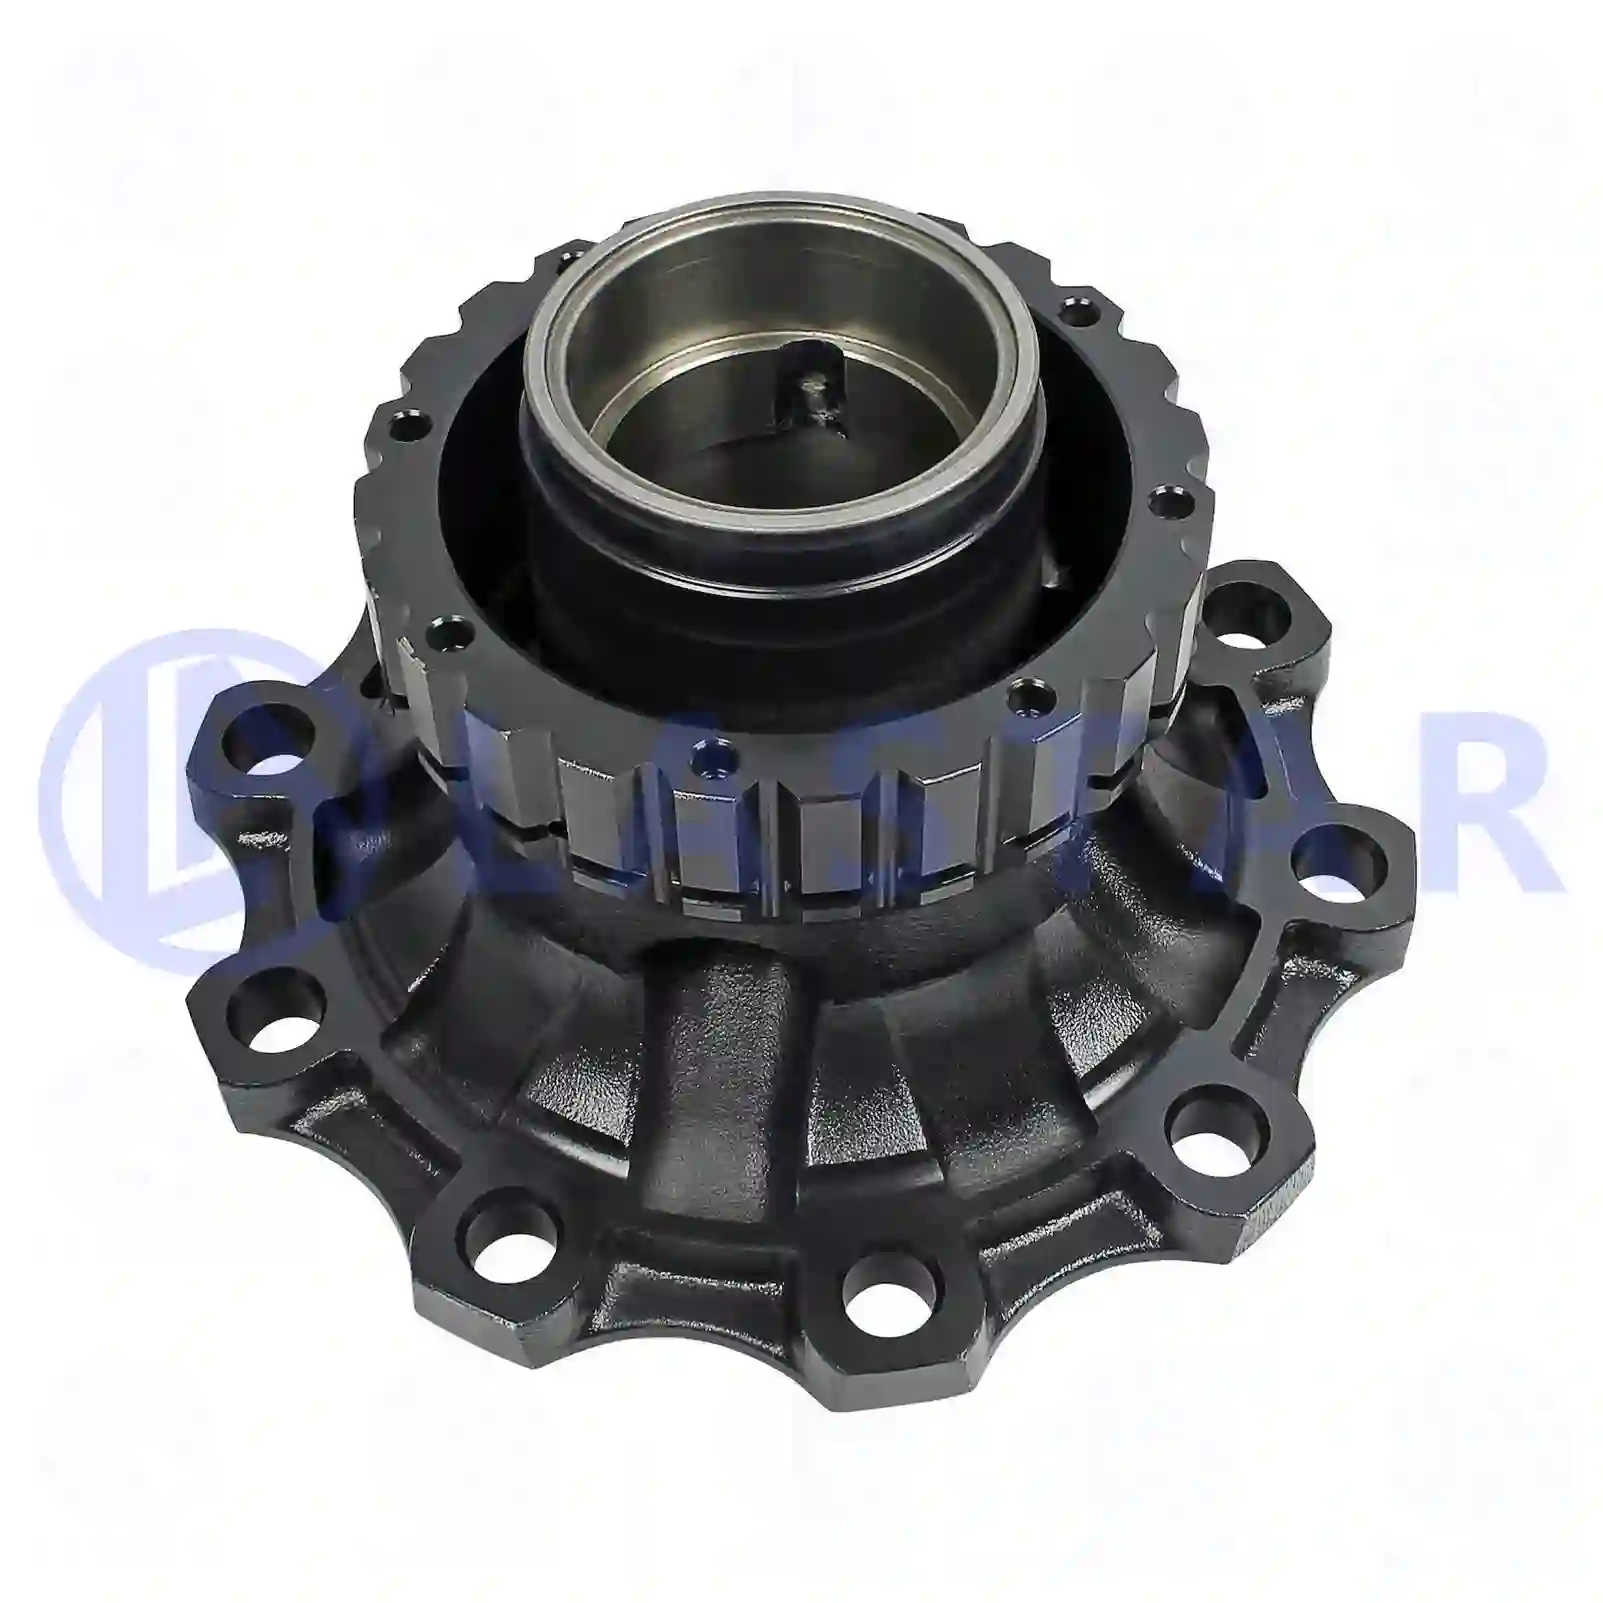 Wheel hub, without bearings, 77726598, 7421022433S, 7485111789S, 85107749S, 85111789S, , ||  77726598 Lastar Spare Part | Truck Spare Parts, Auotomotive Spare Parts Wheel hub, without bearings, 77726598, 7421022433S, 7485111789S, 85107749S, 85111789S, , ||  77726598 Lastar Spare Part | Truck Spare Parts, Auotomotive Spare Parts